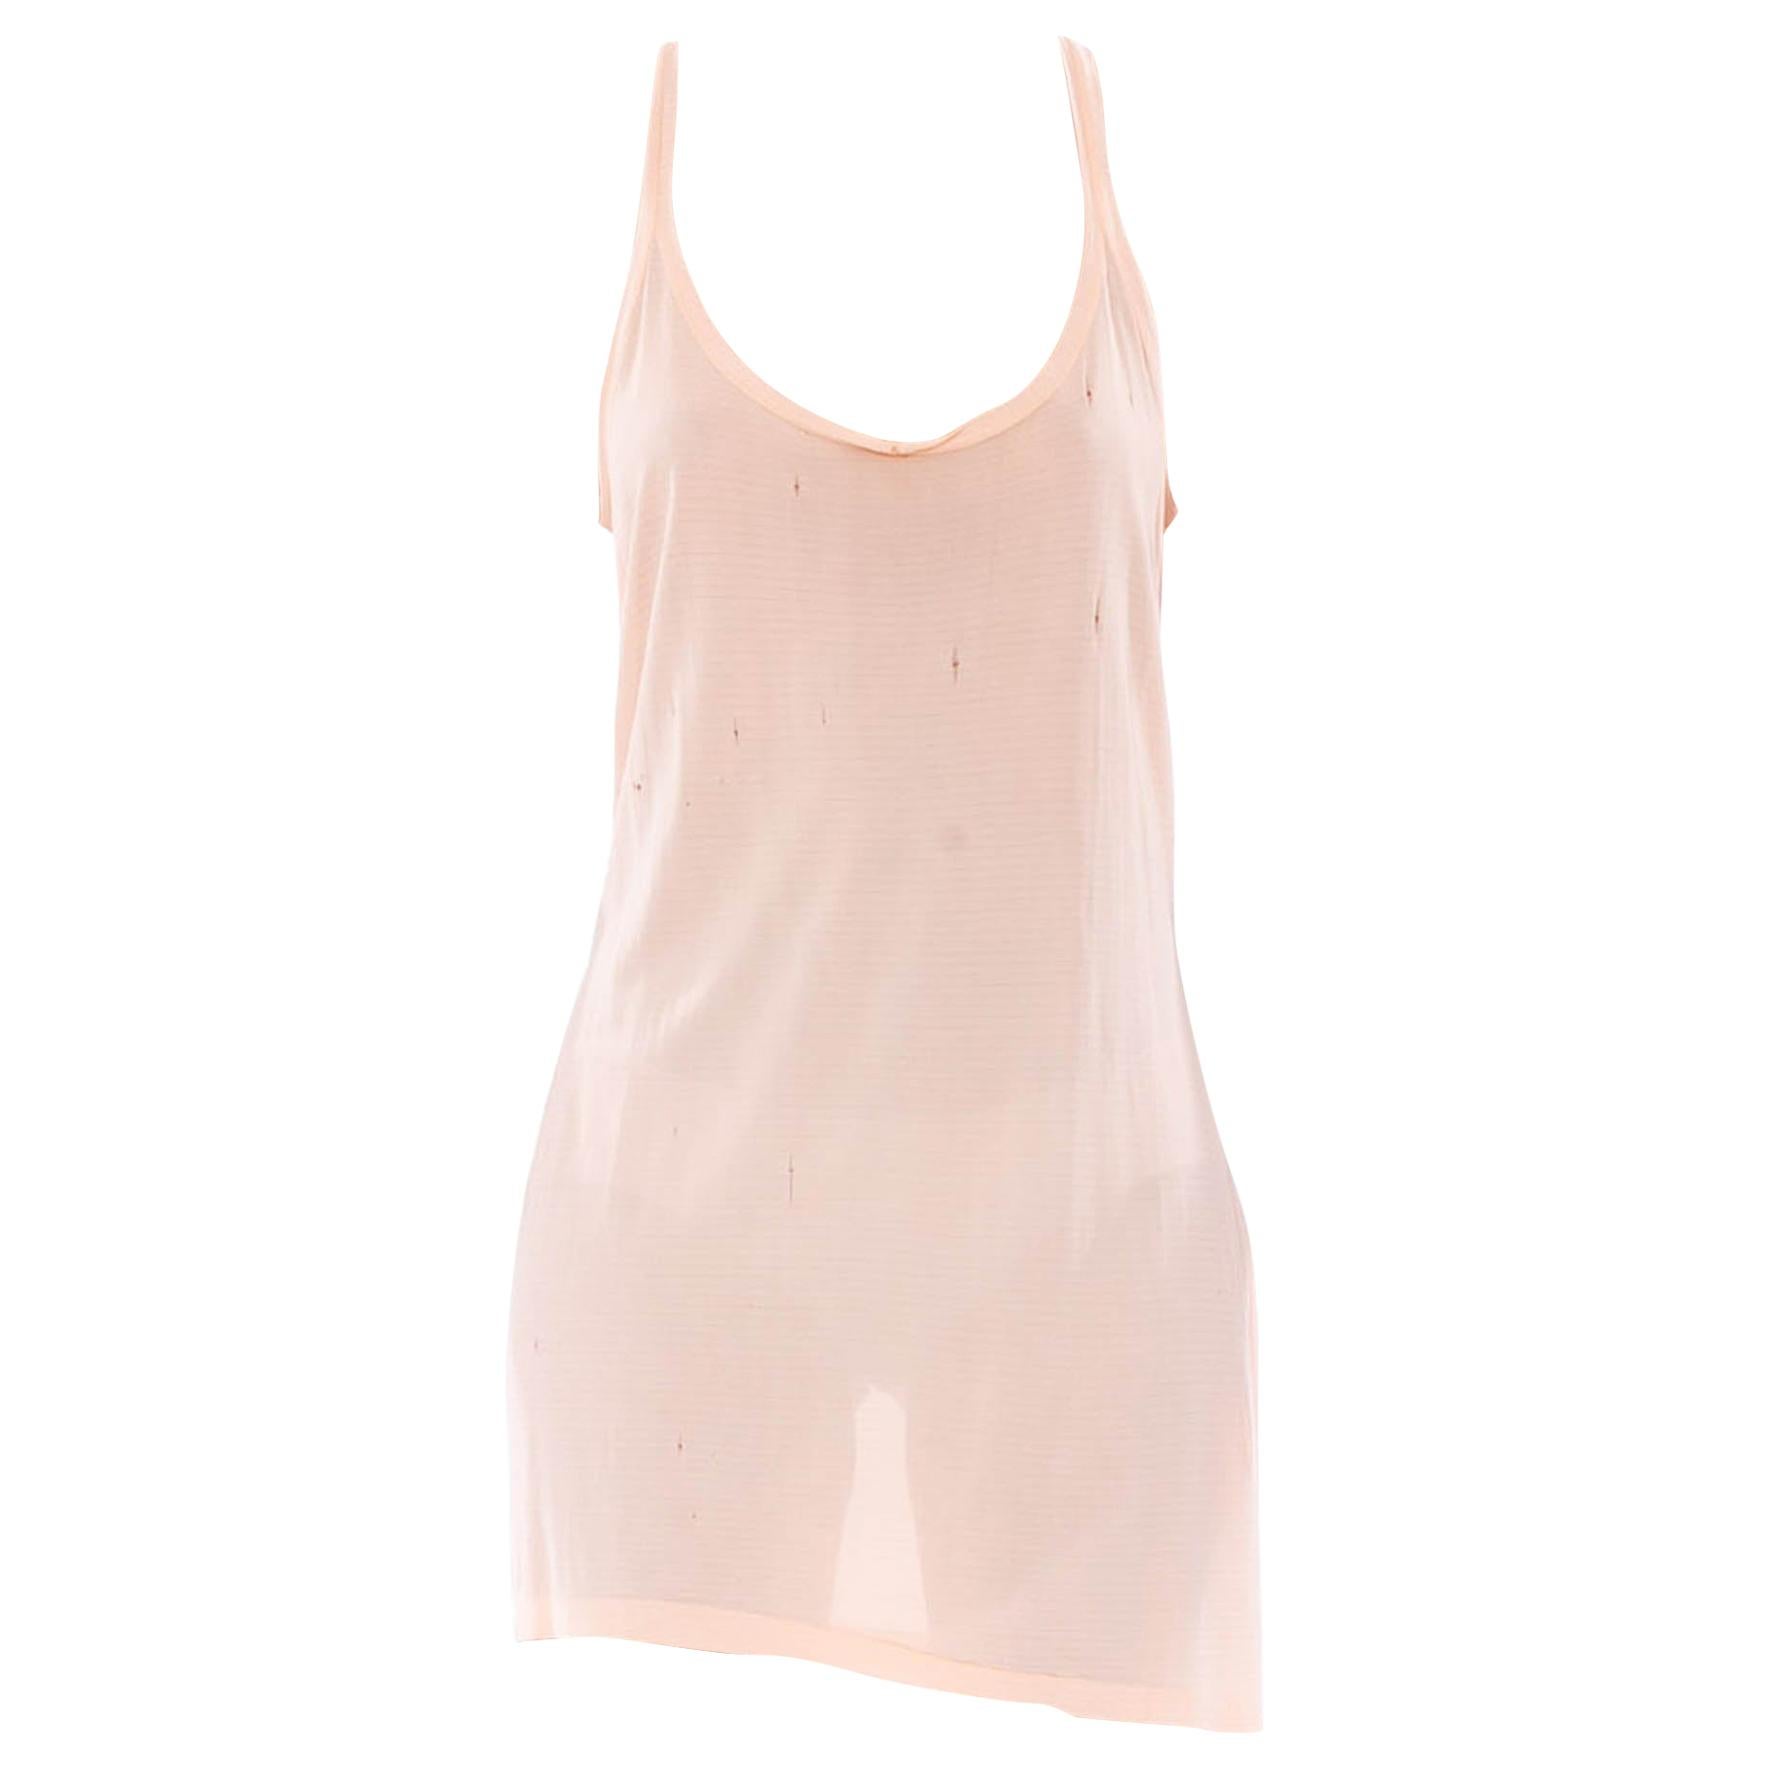 1930S Blush Pink Slinky Rayon Jersey Negligee As-Is With A Few Holes